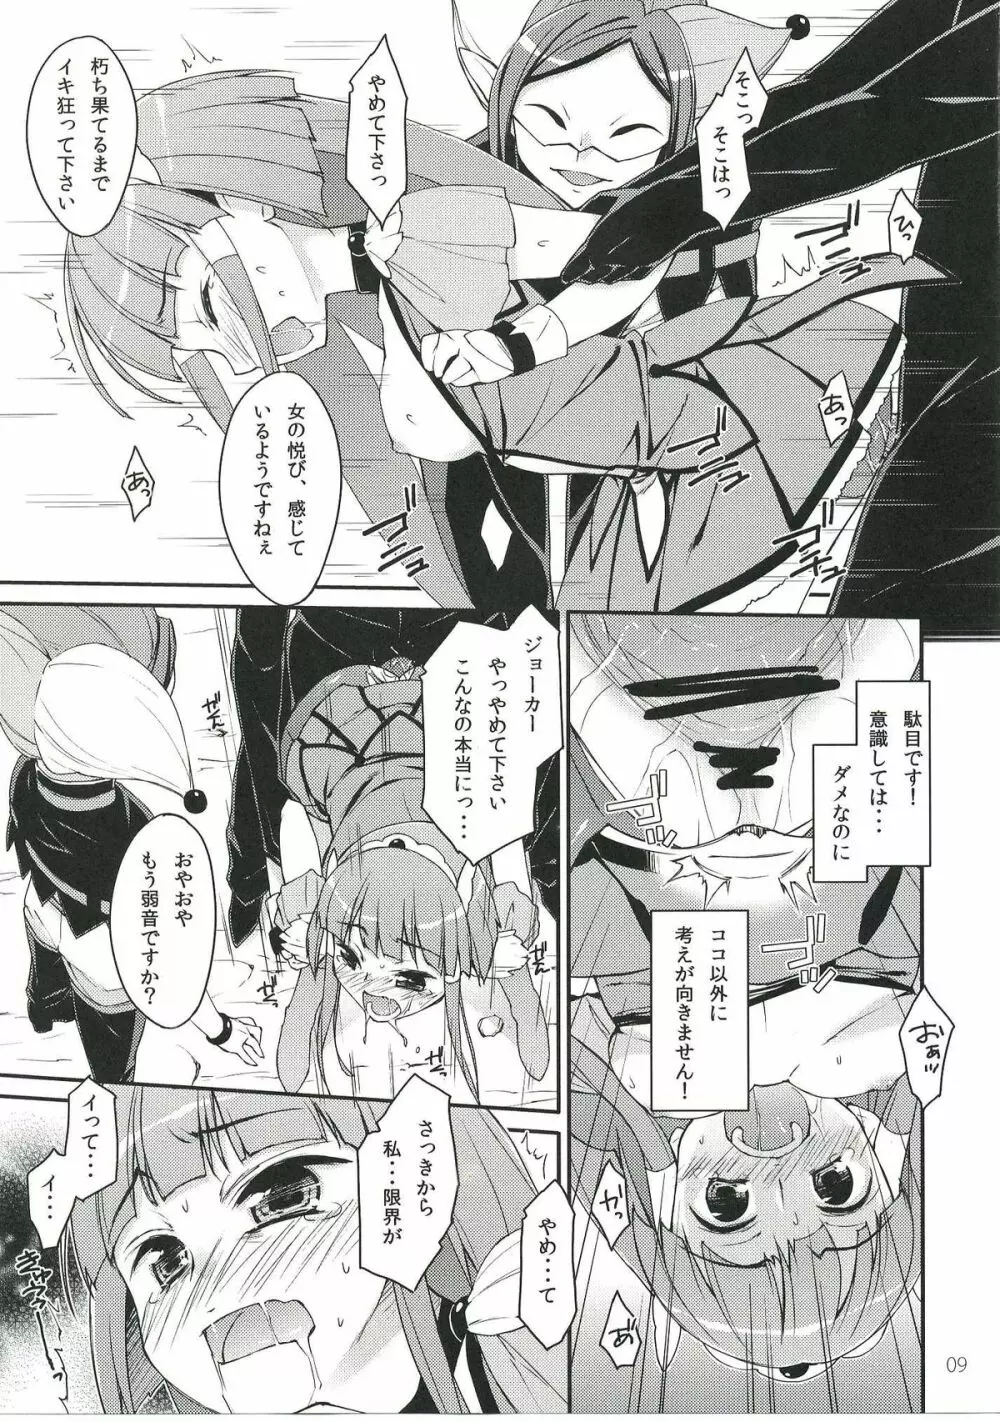 Bad End Beauty Page.8